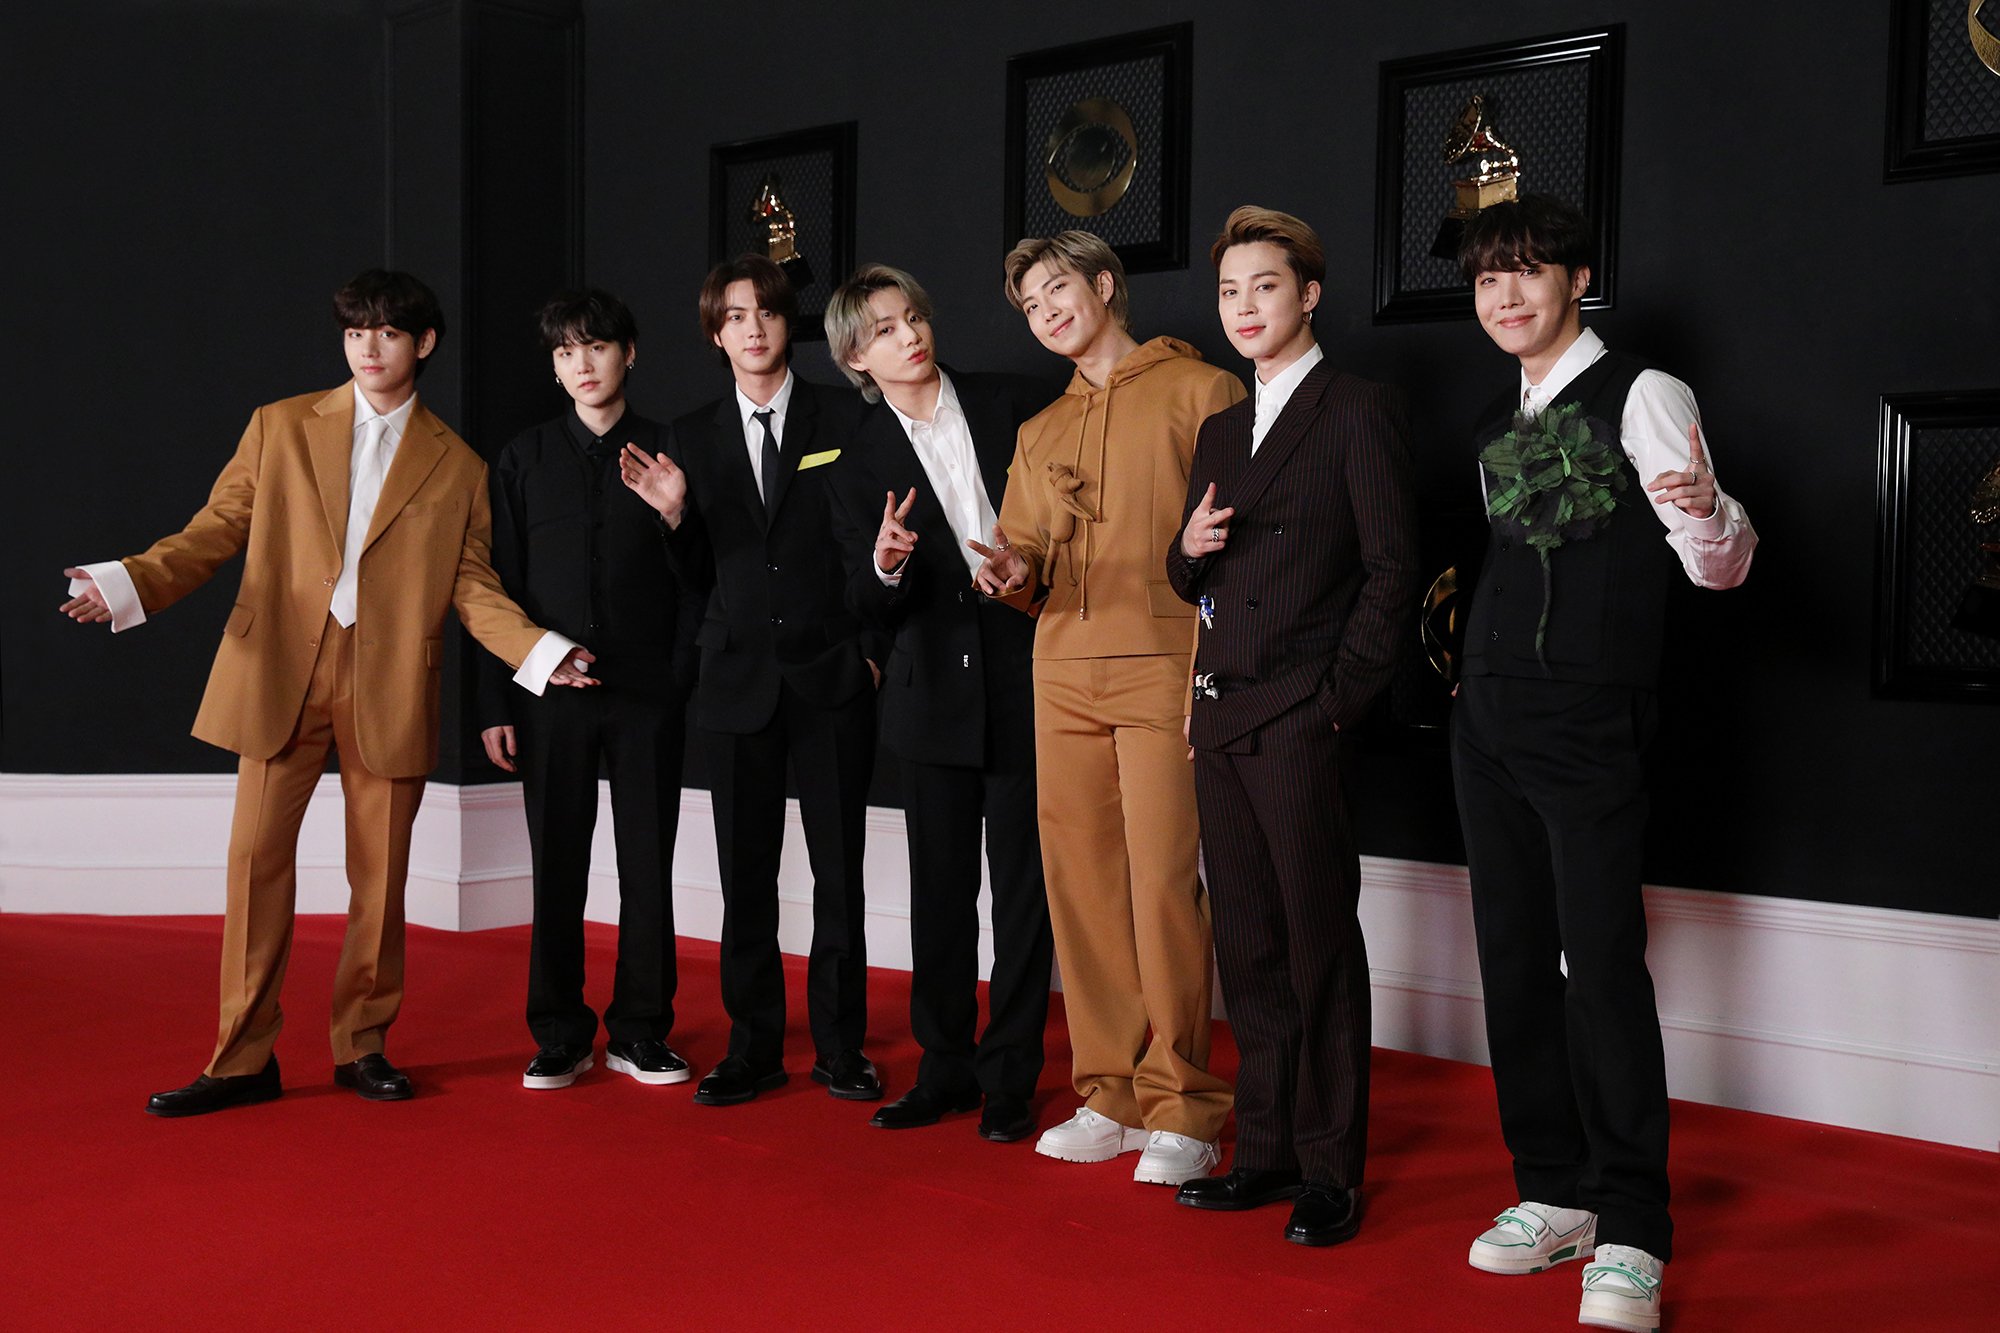 All seven members of BTS, all dressed in suits, taking photos on the red carpet for The Grammys. Their nomination signals the popularity of the Hallyu Wave.